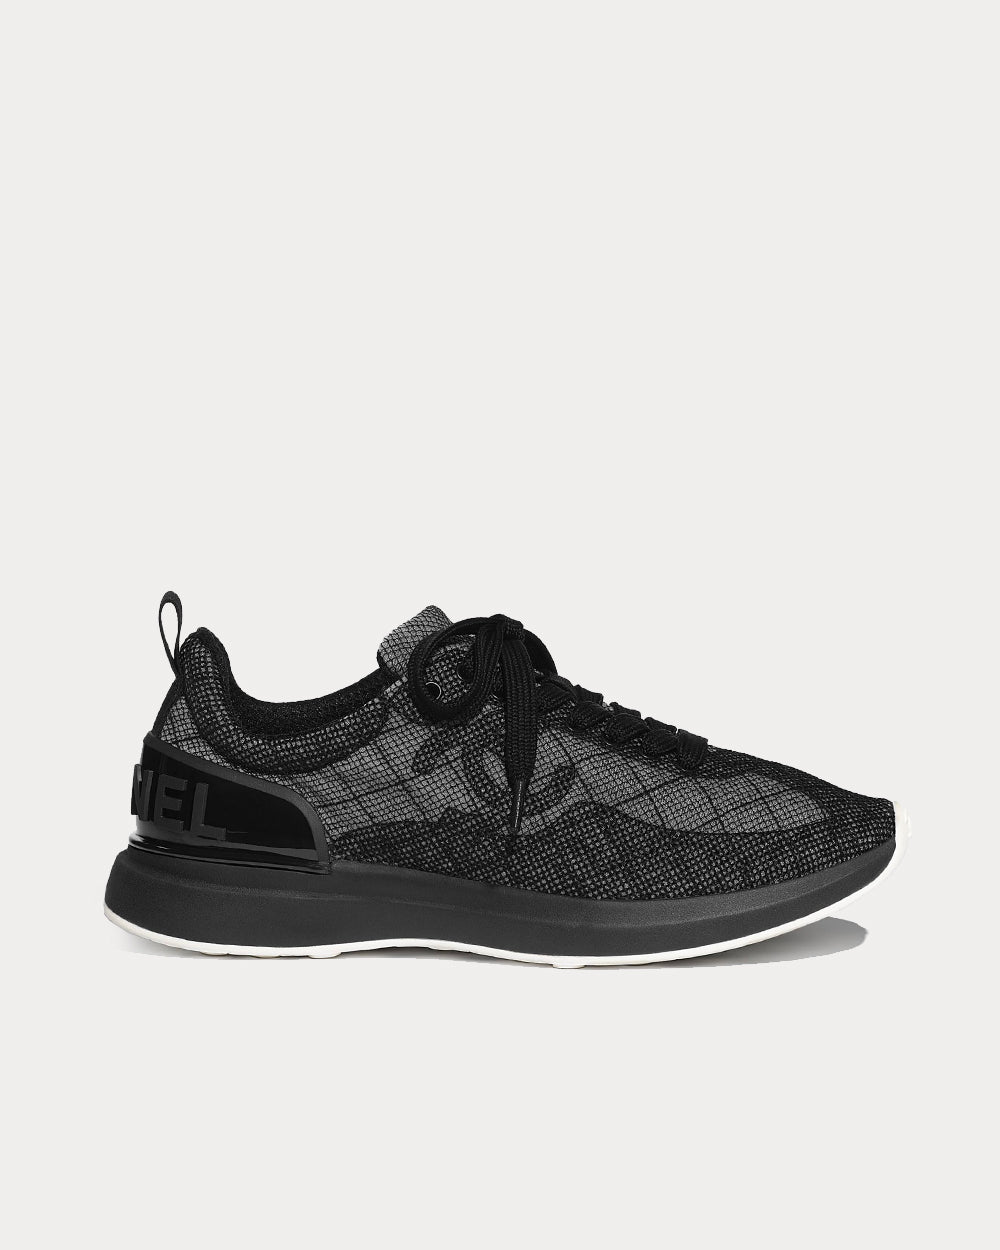 Chanel - Embroidered Mesh Black Low Top Sneakers